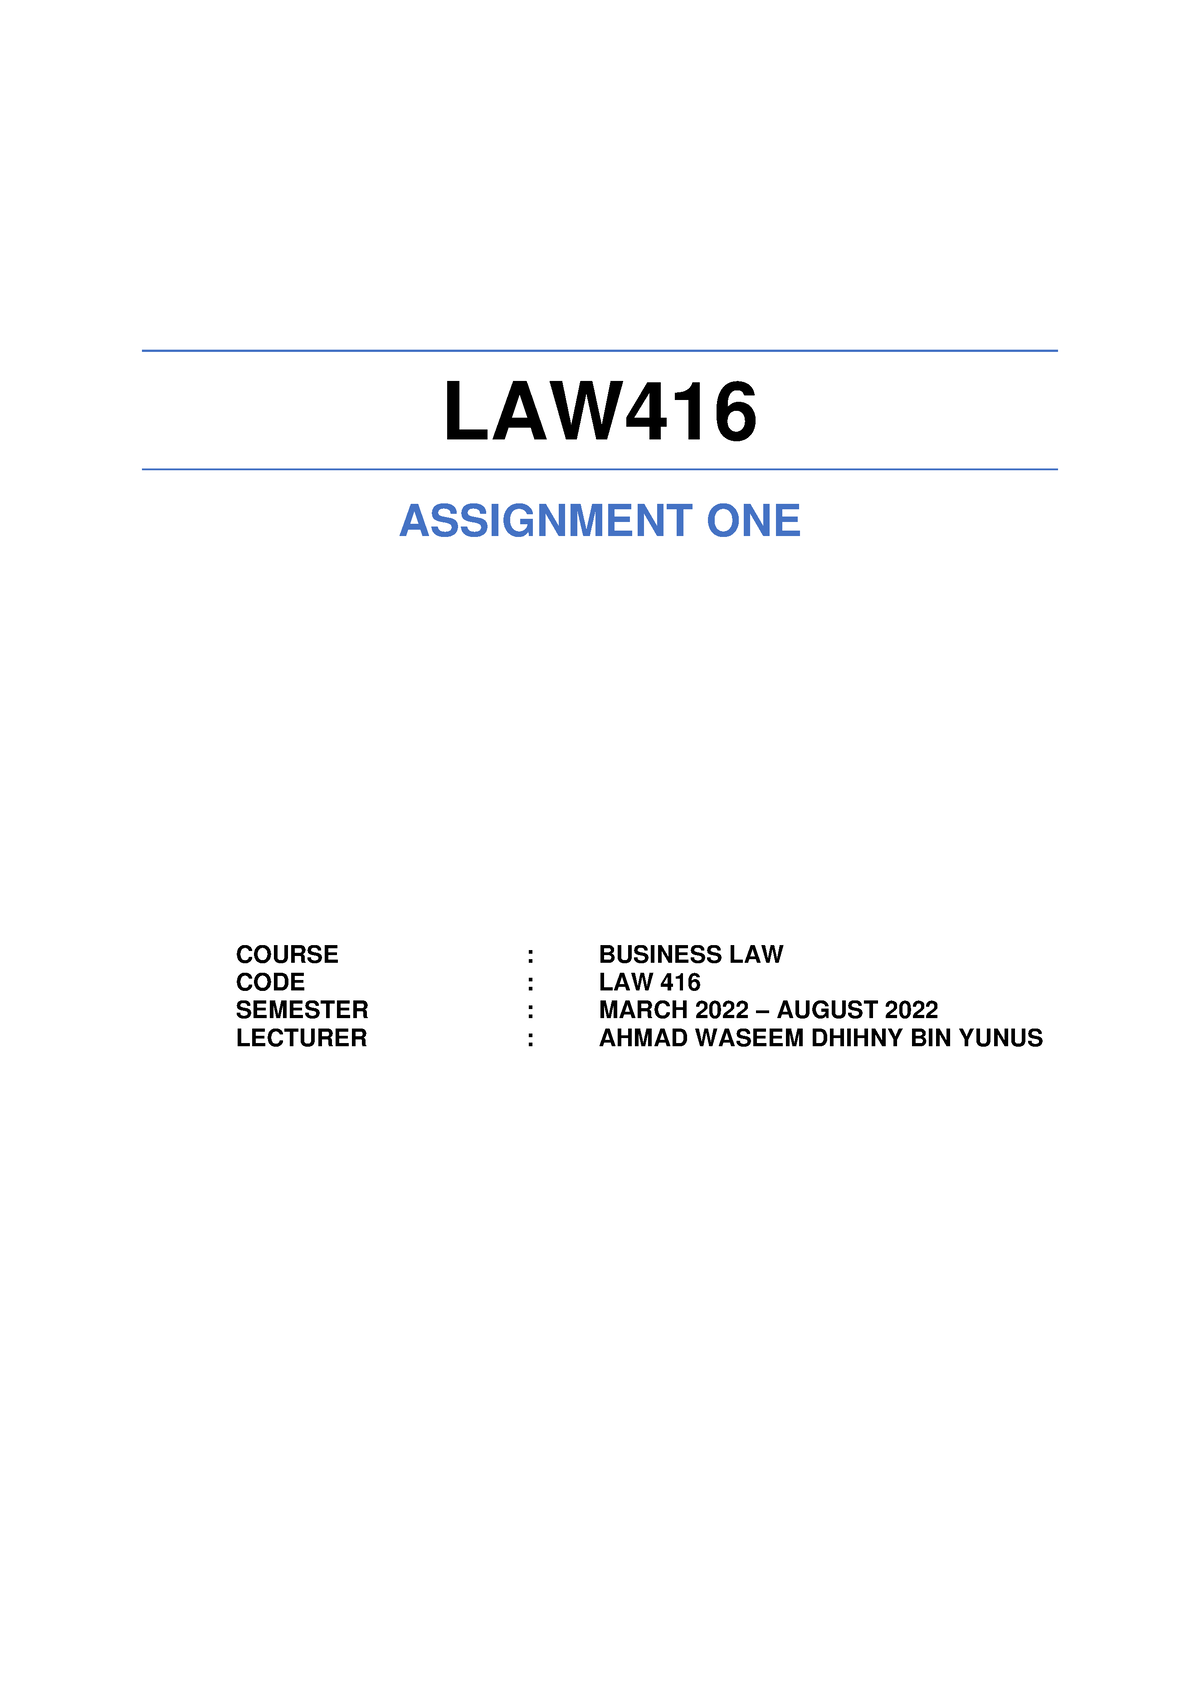 group assignment law416